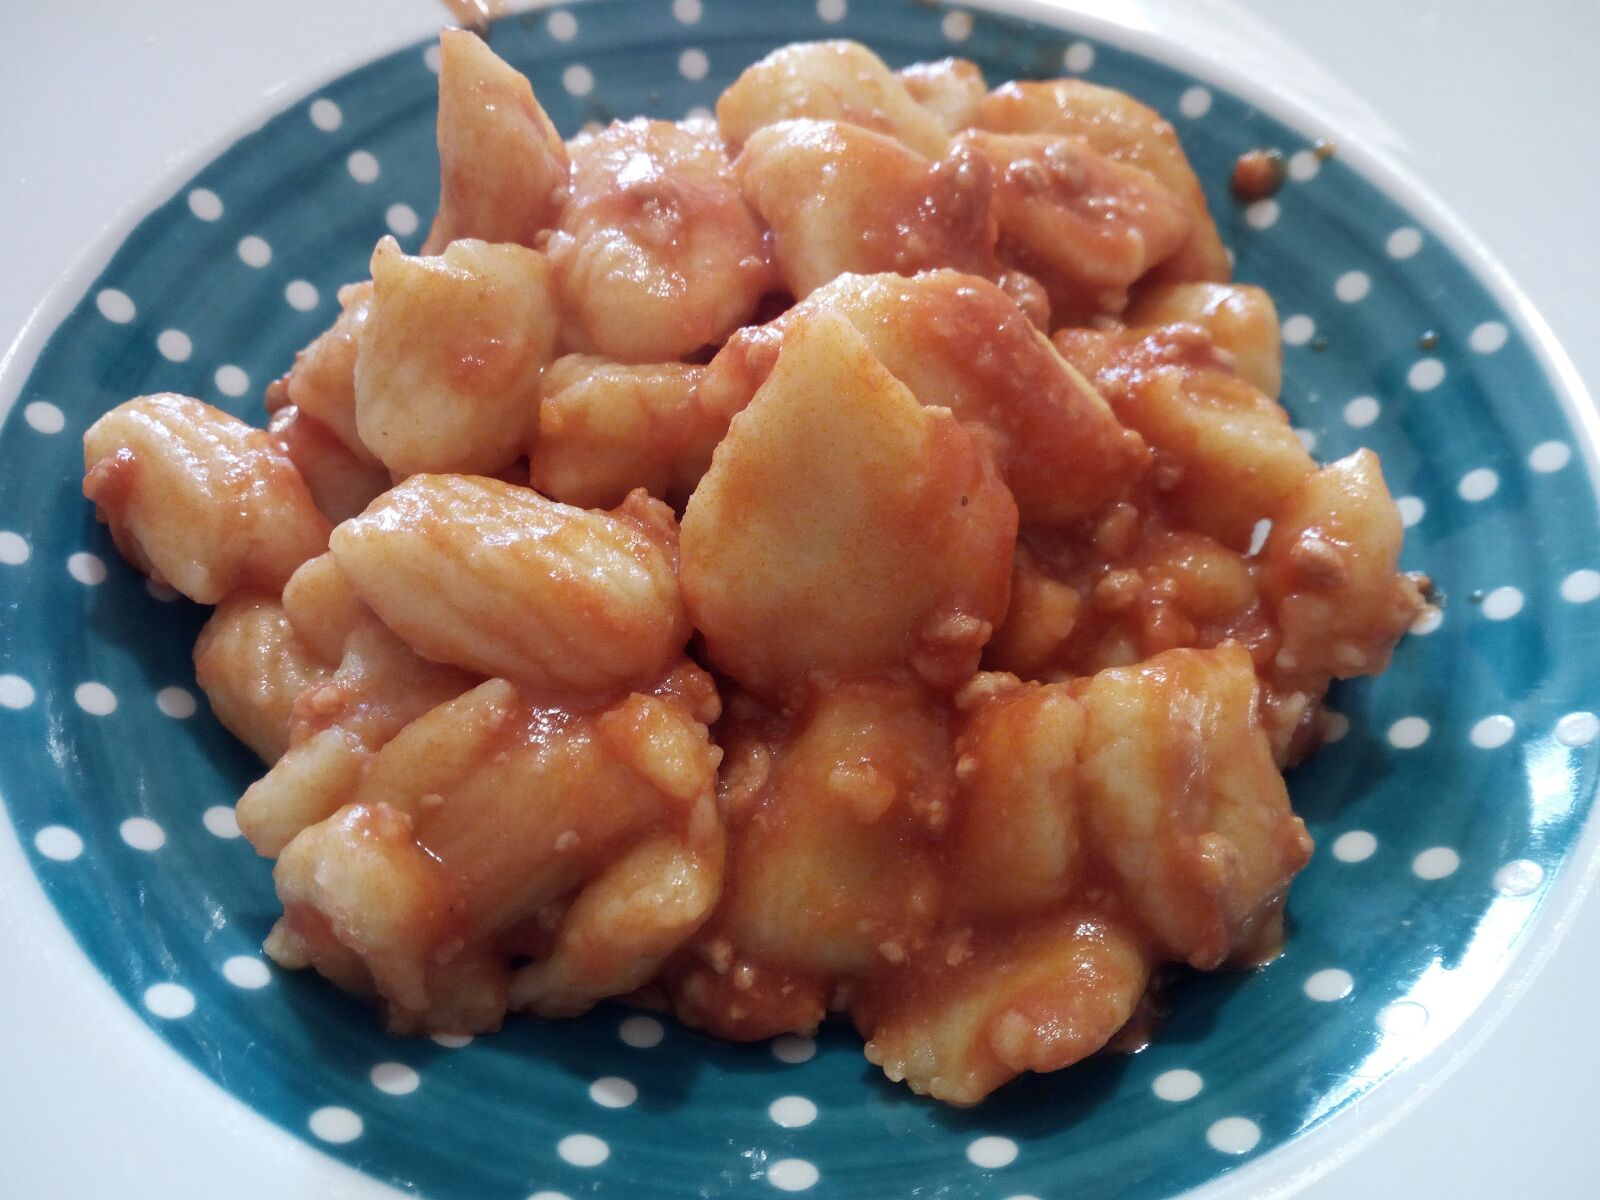 HUAWEI GR3 sample photo. Gnocchi, italy, cooking photography